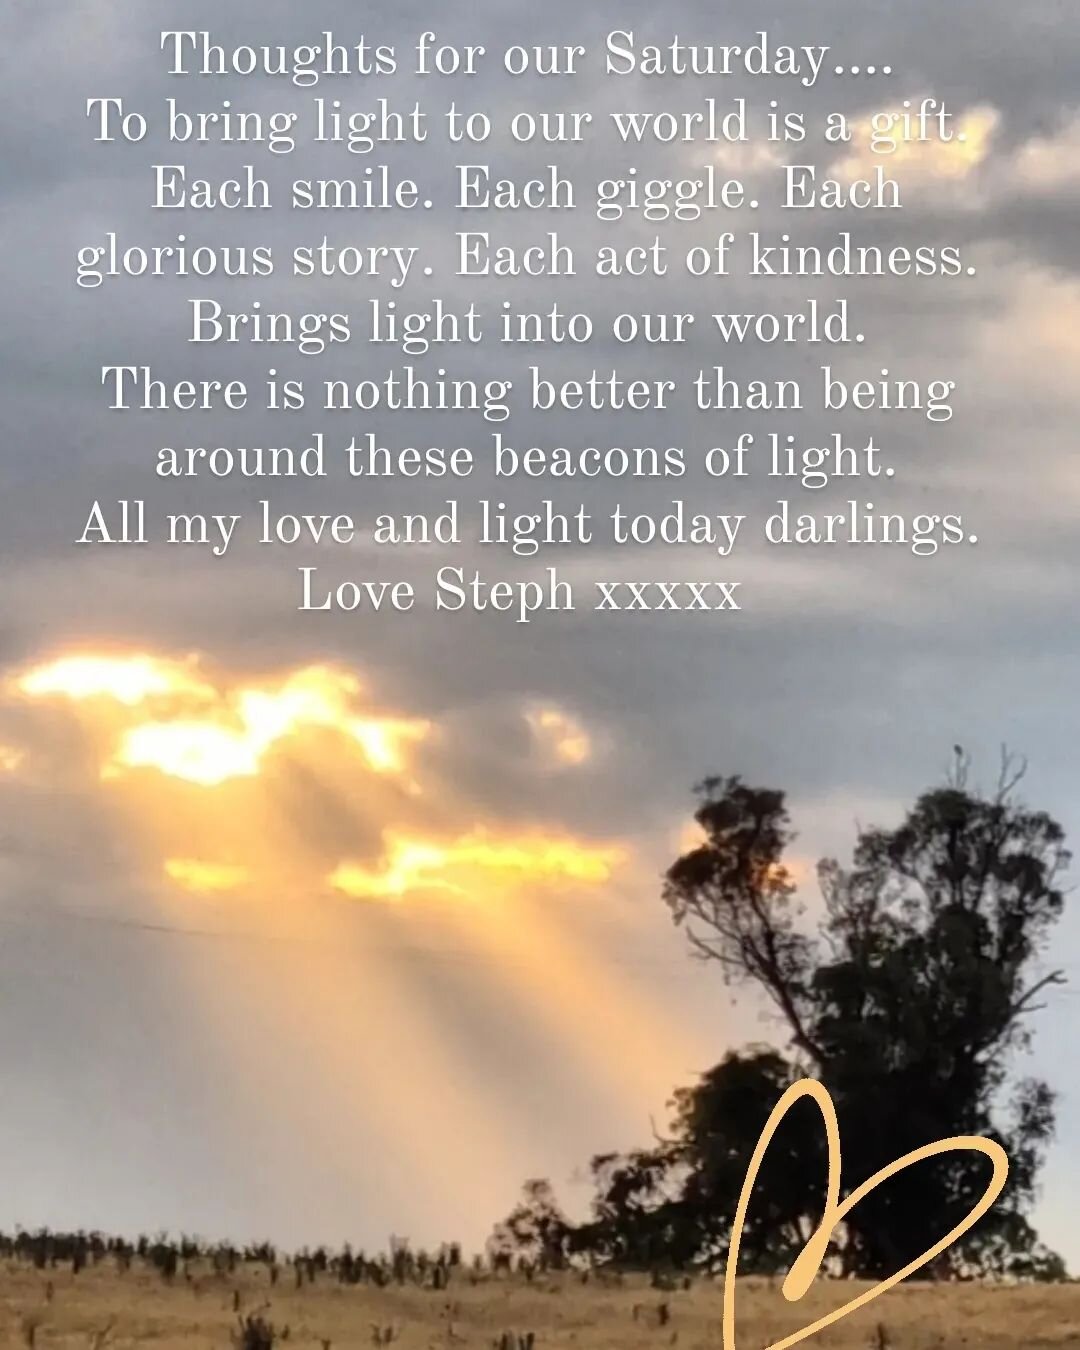 Thoughts for our Saturday....
To bring light to our world is a gift.
Each smile. Each giggle. Each glorious story. Each act of kindness. Brings light into our world.
There is nothing better than being around these beacons of light.
All my love and li